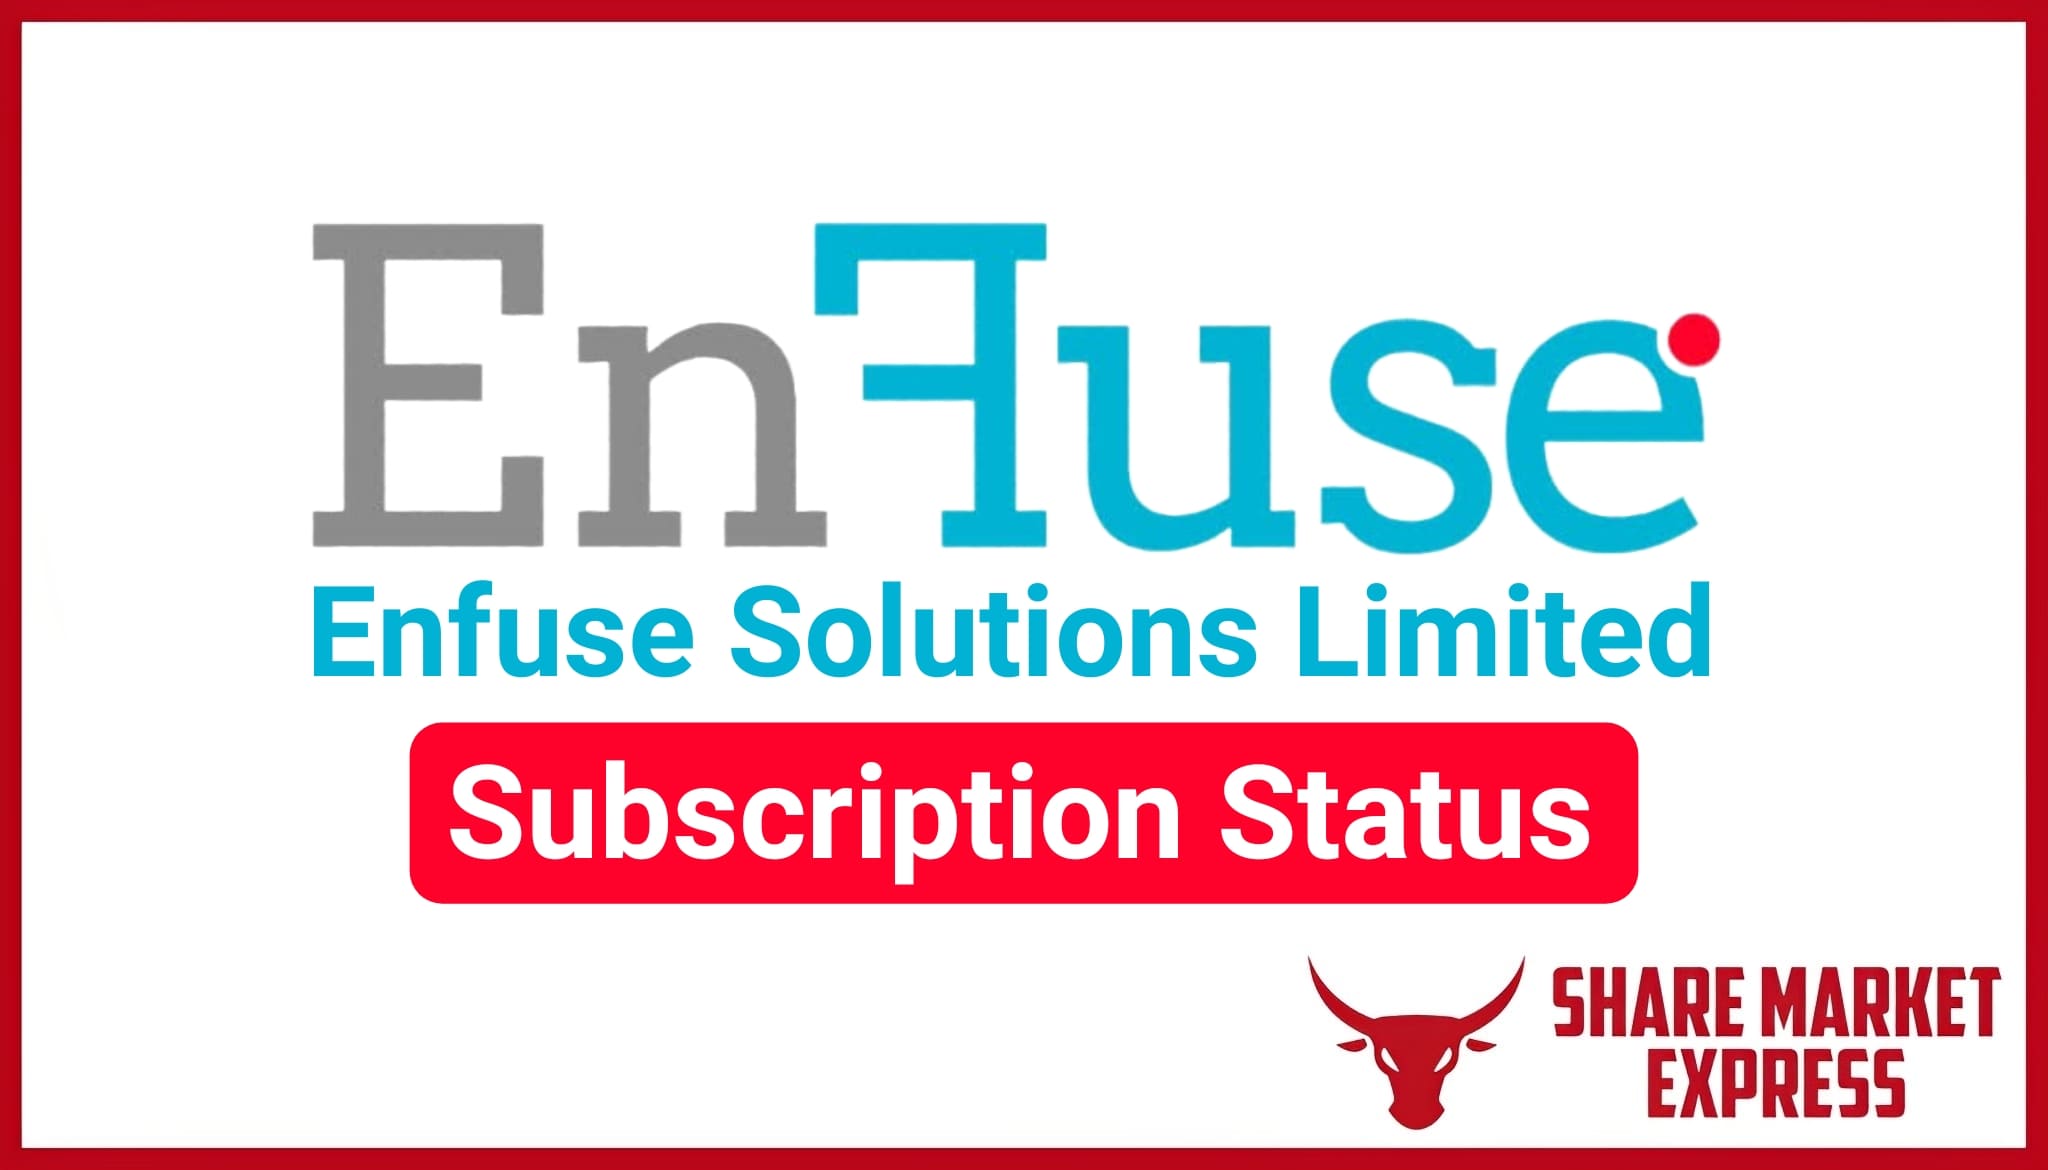 Enfuse Solutions IPO Subscription Status